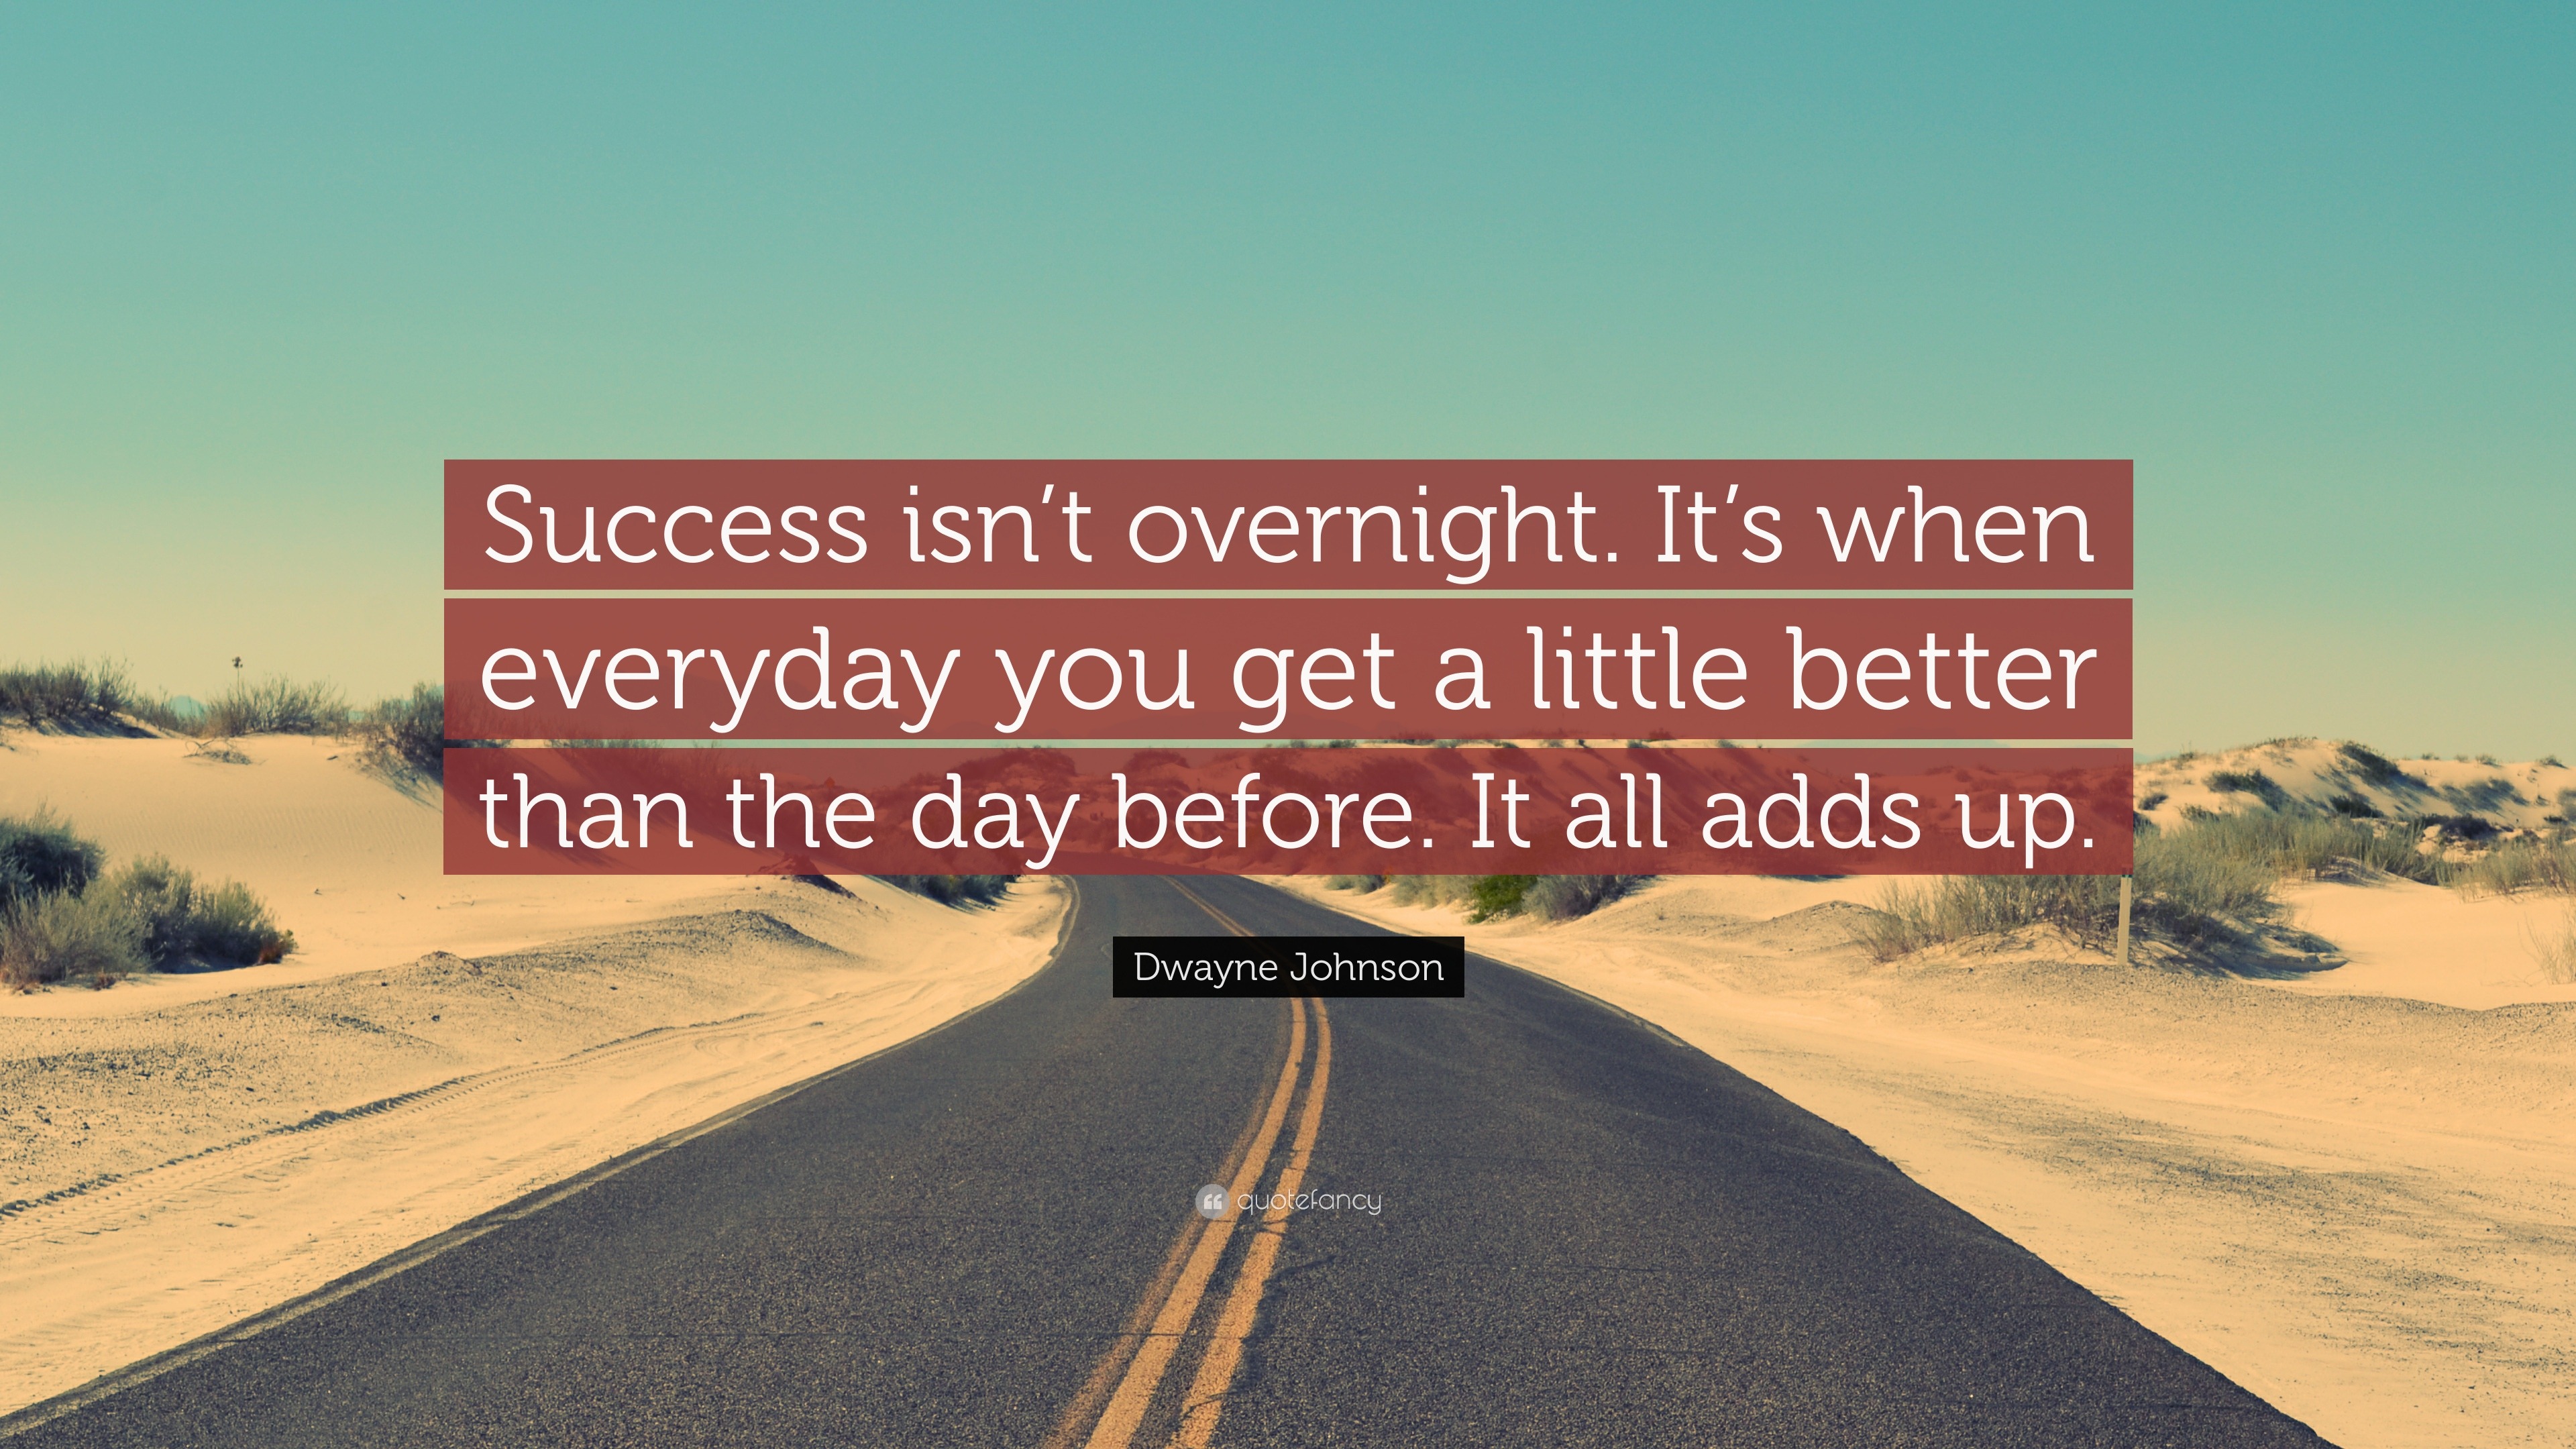 Dwayne Johnson Quote: “Success isn’t overnight. It’s when everyday you